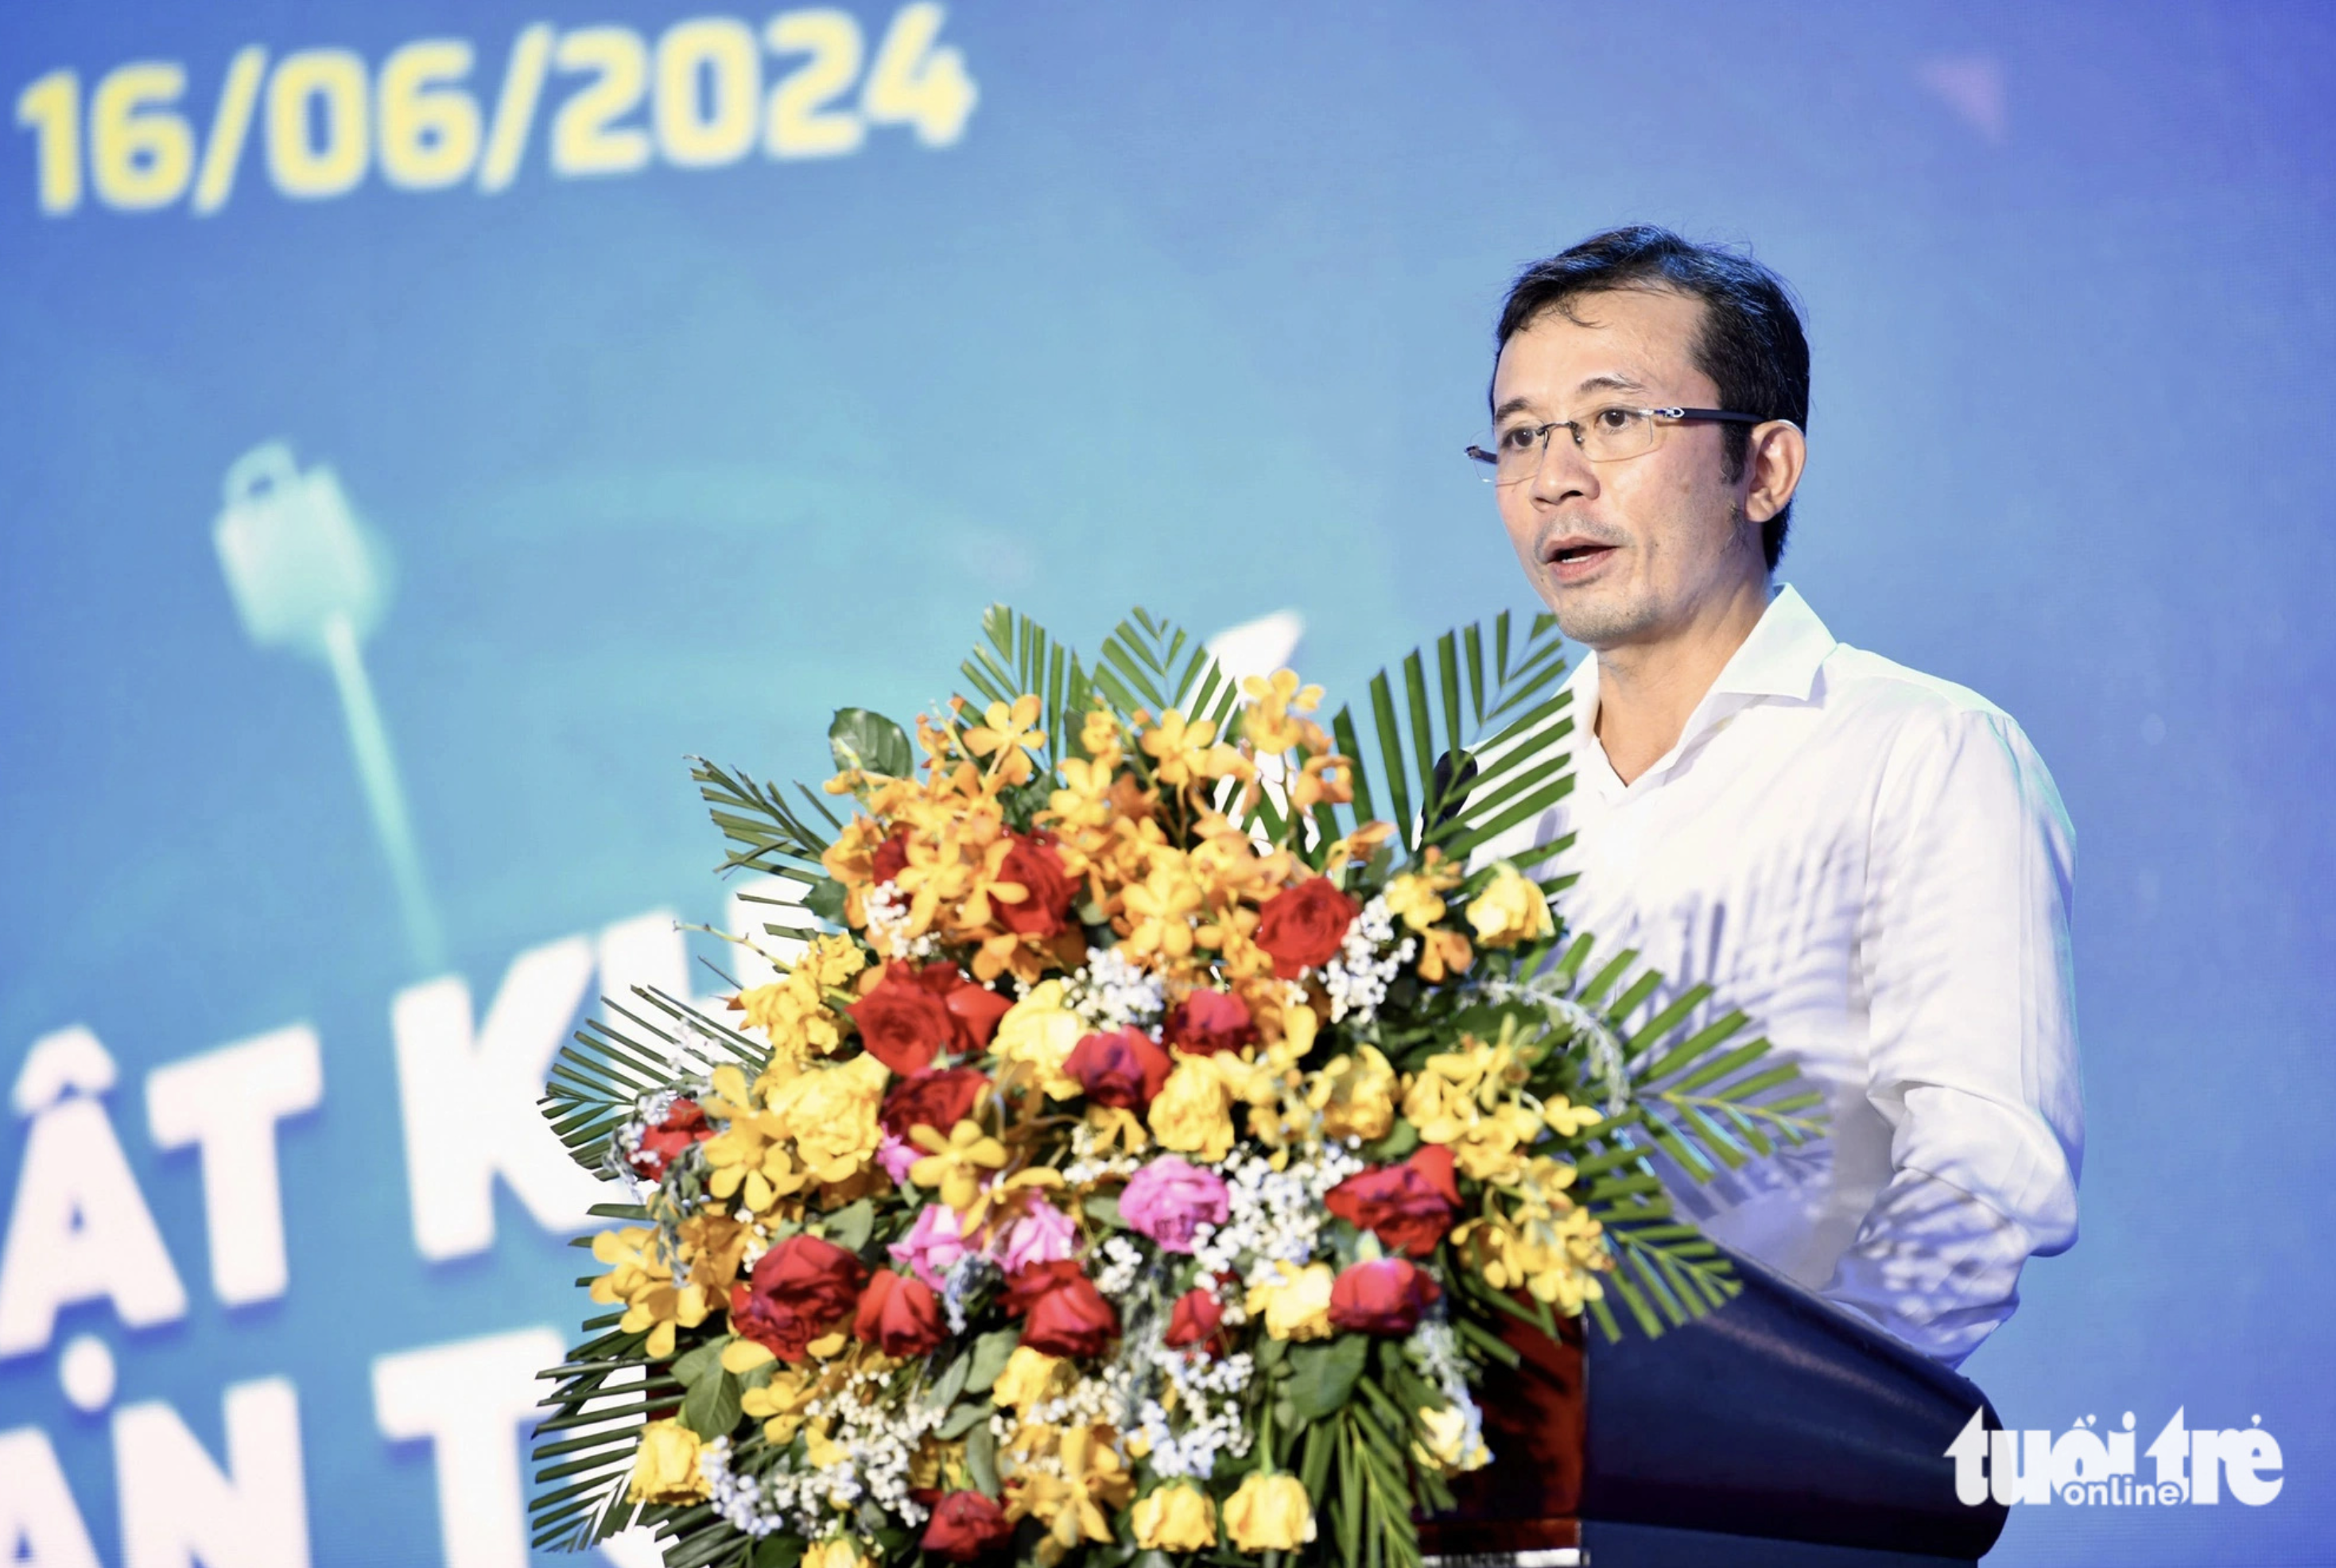 Tran Xuan Toan, deputy editor-in-chief of Tuoi Tre (Youth) newspaper and head of the organization board of the festival, delivers his speech at the closing ceremony on June 16, 2024. Photo: Quang Dinh / Tuoi Tre